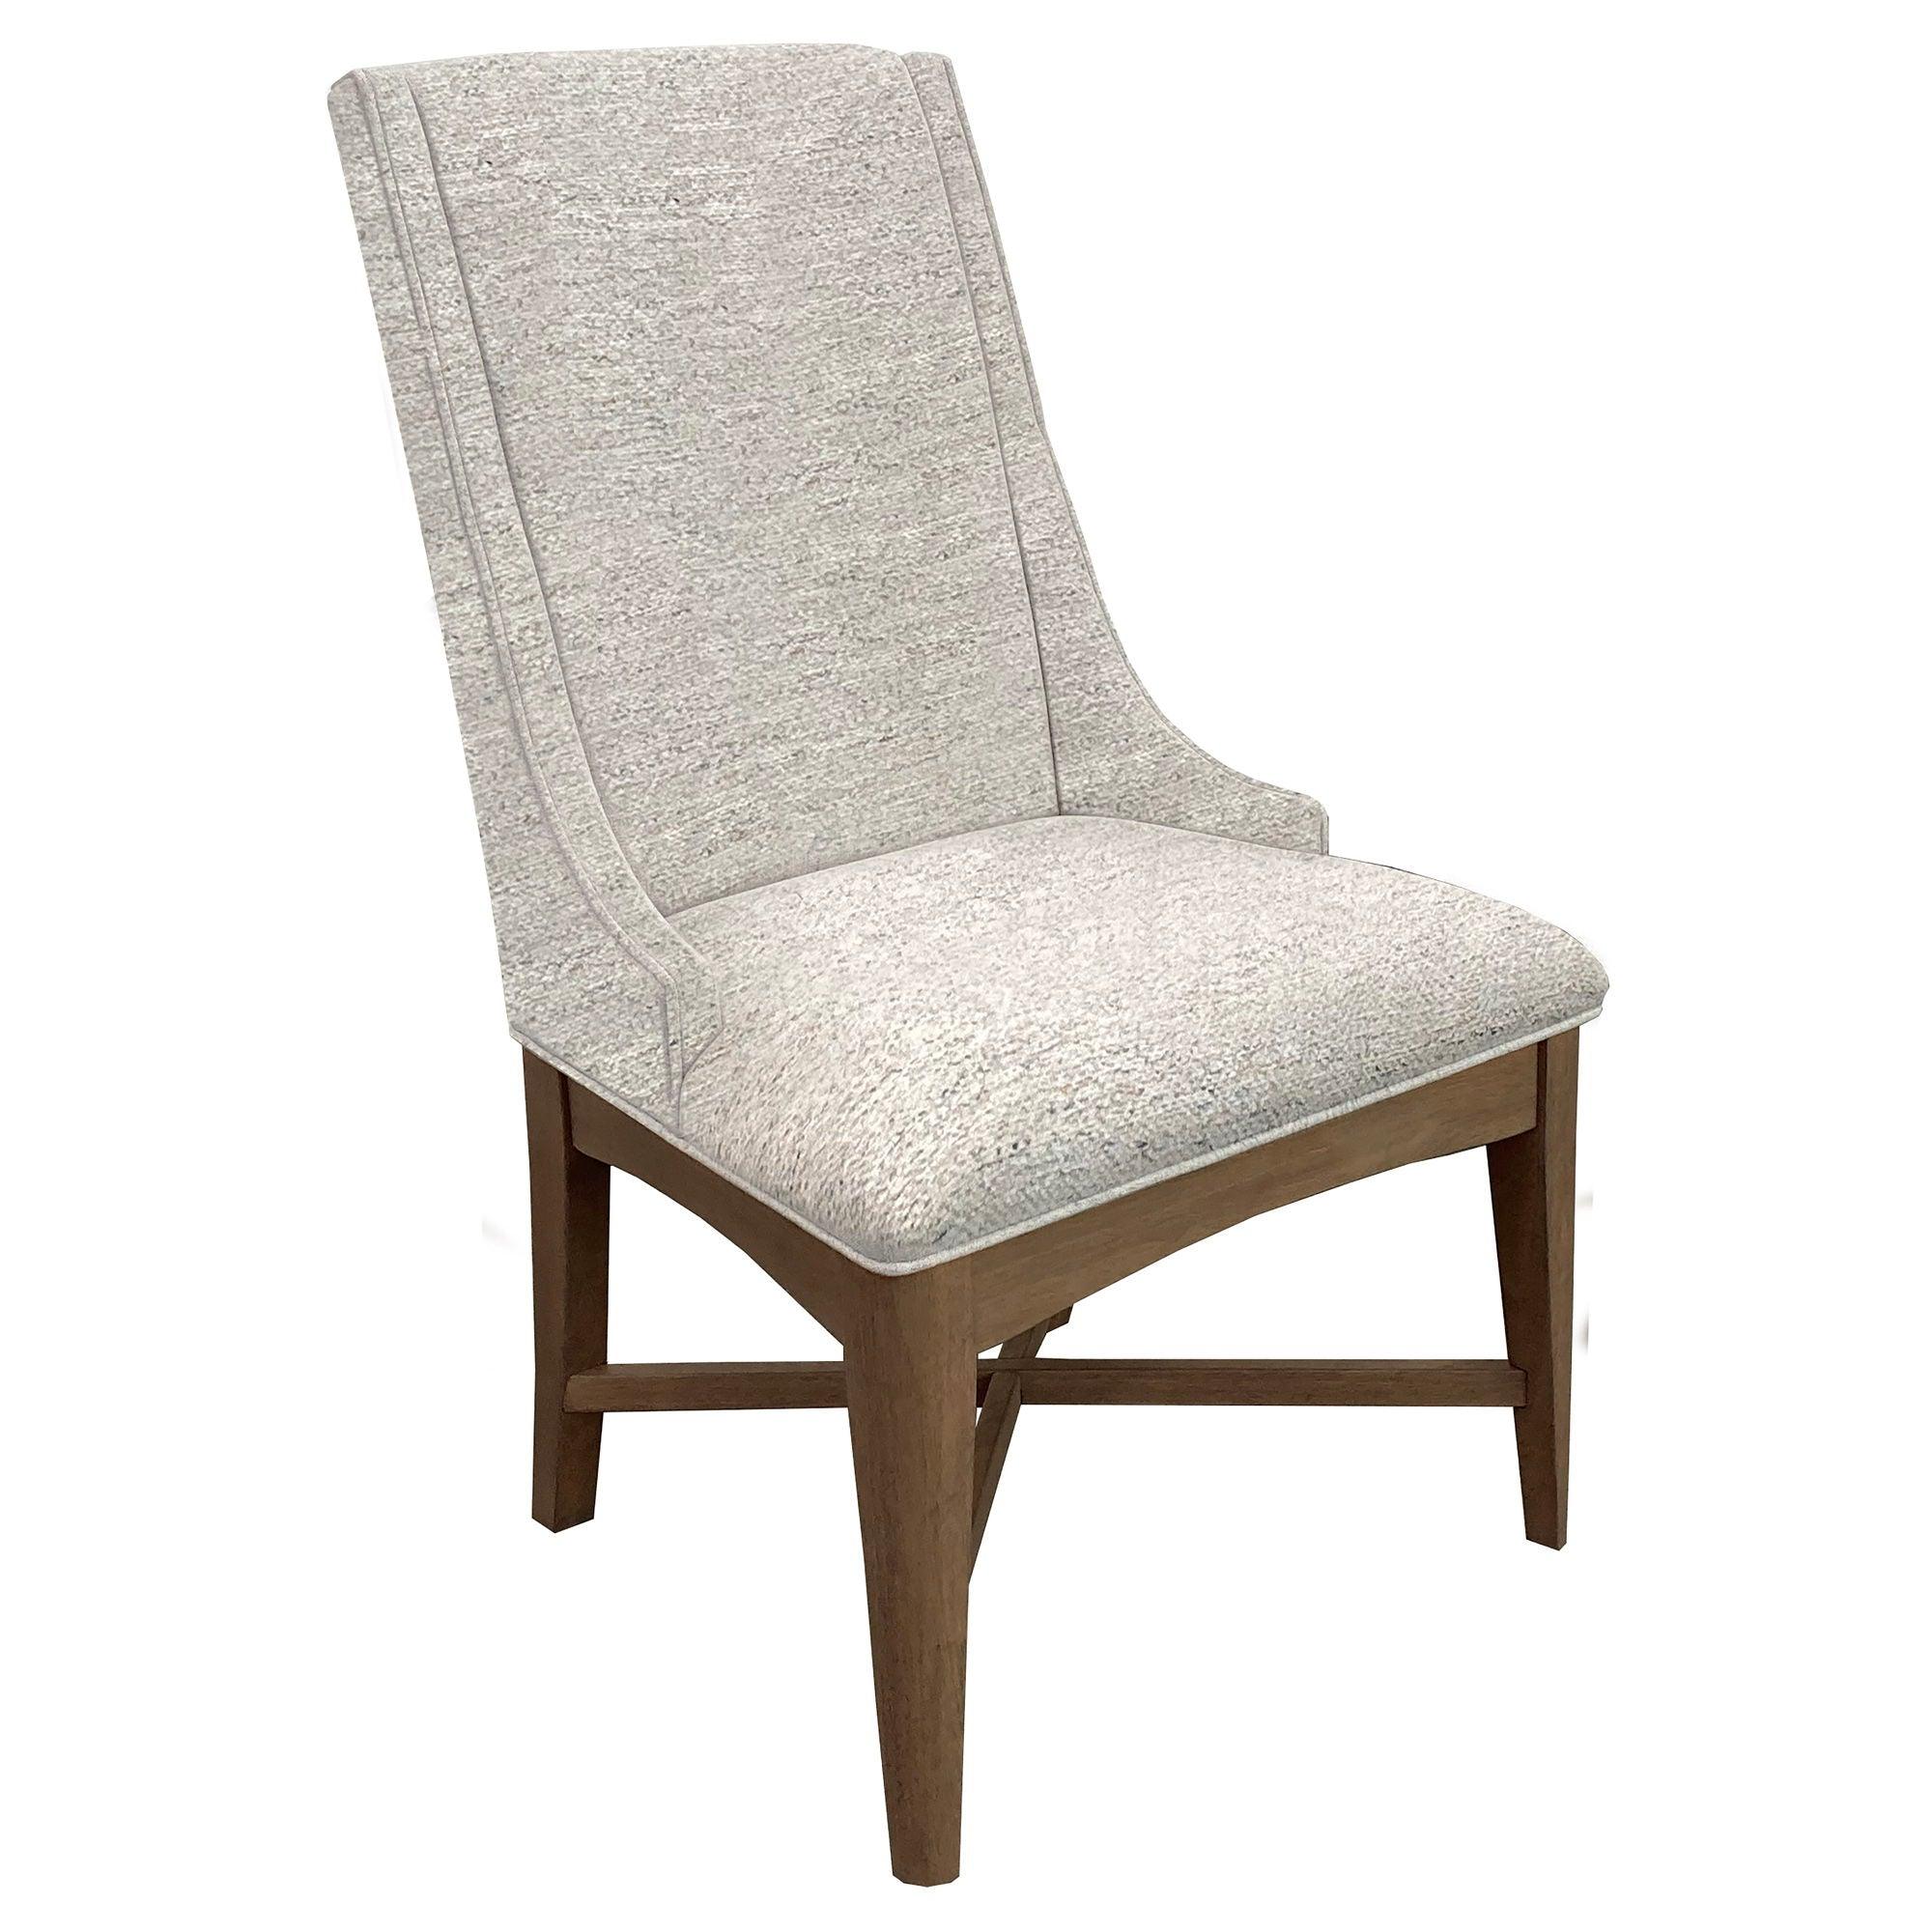 Parker House - Americana Modern Dining - Host Dining Chair (Set of 2) - Cotton - 5th Avenue Furniture